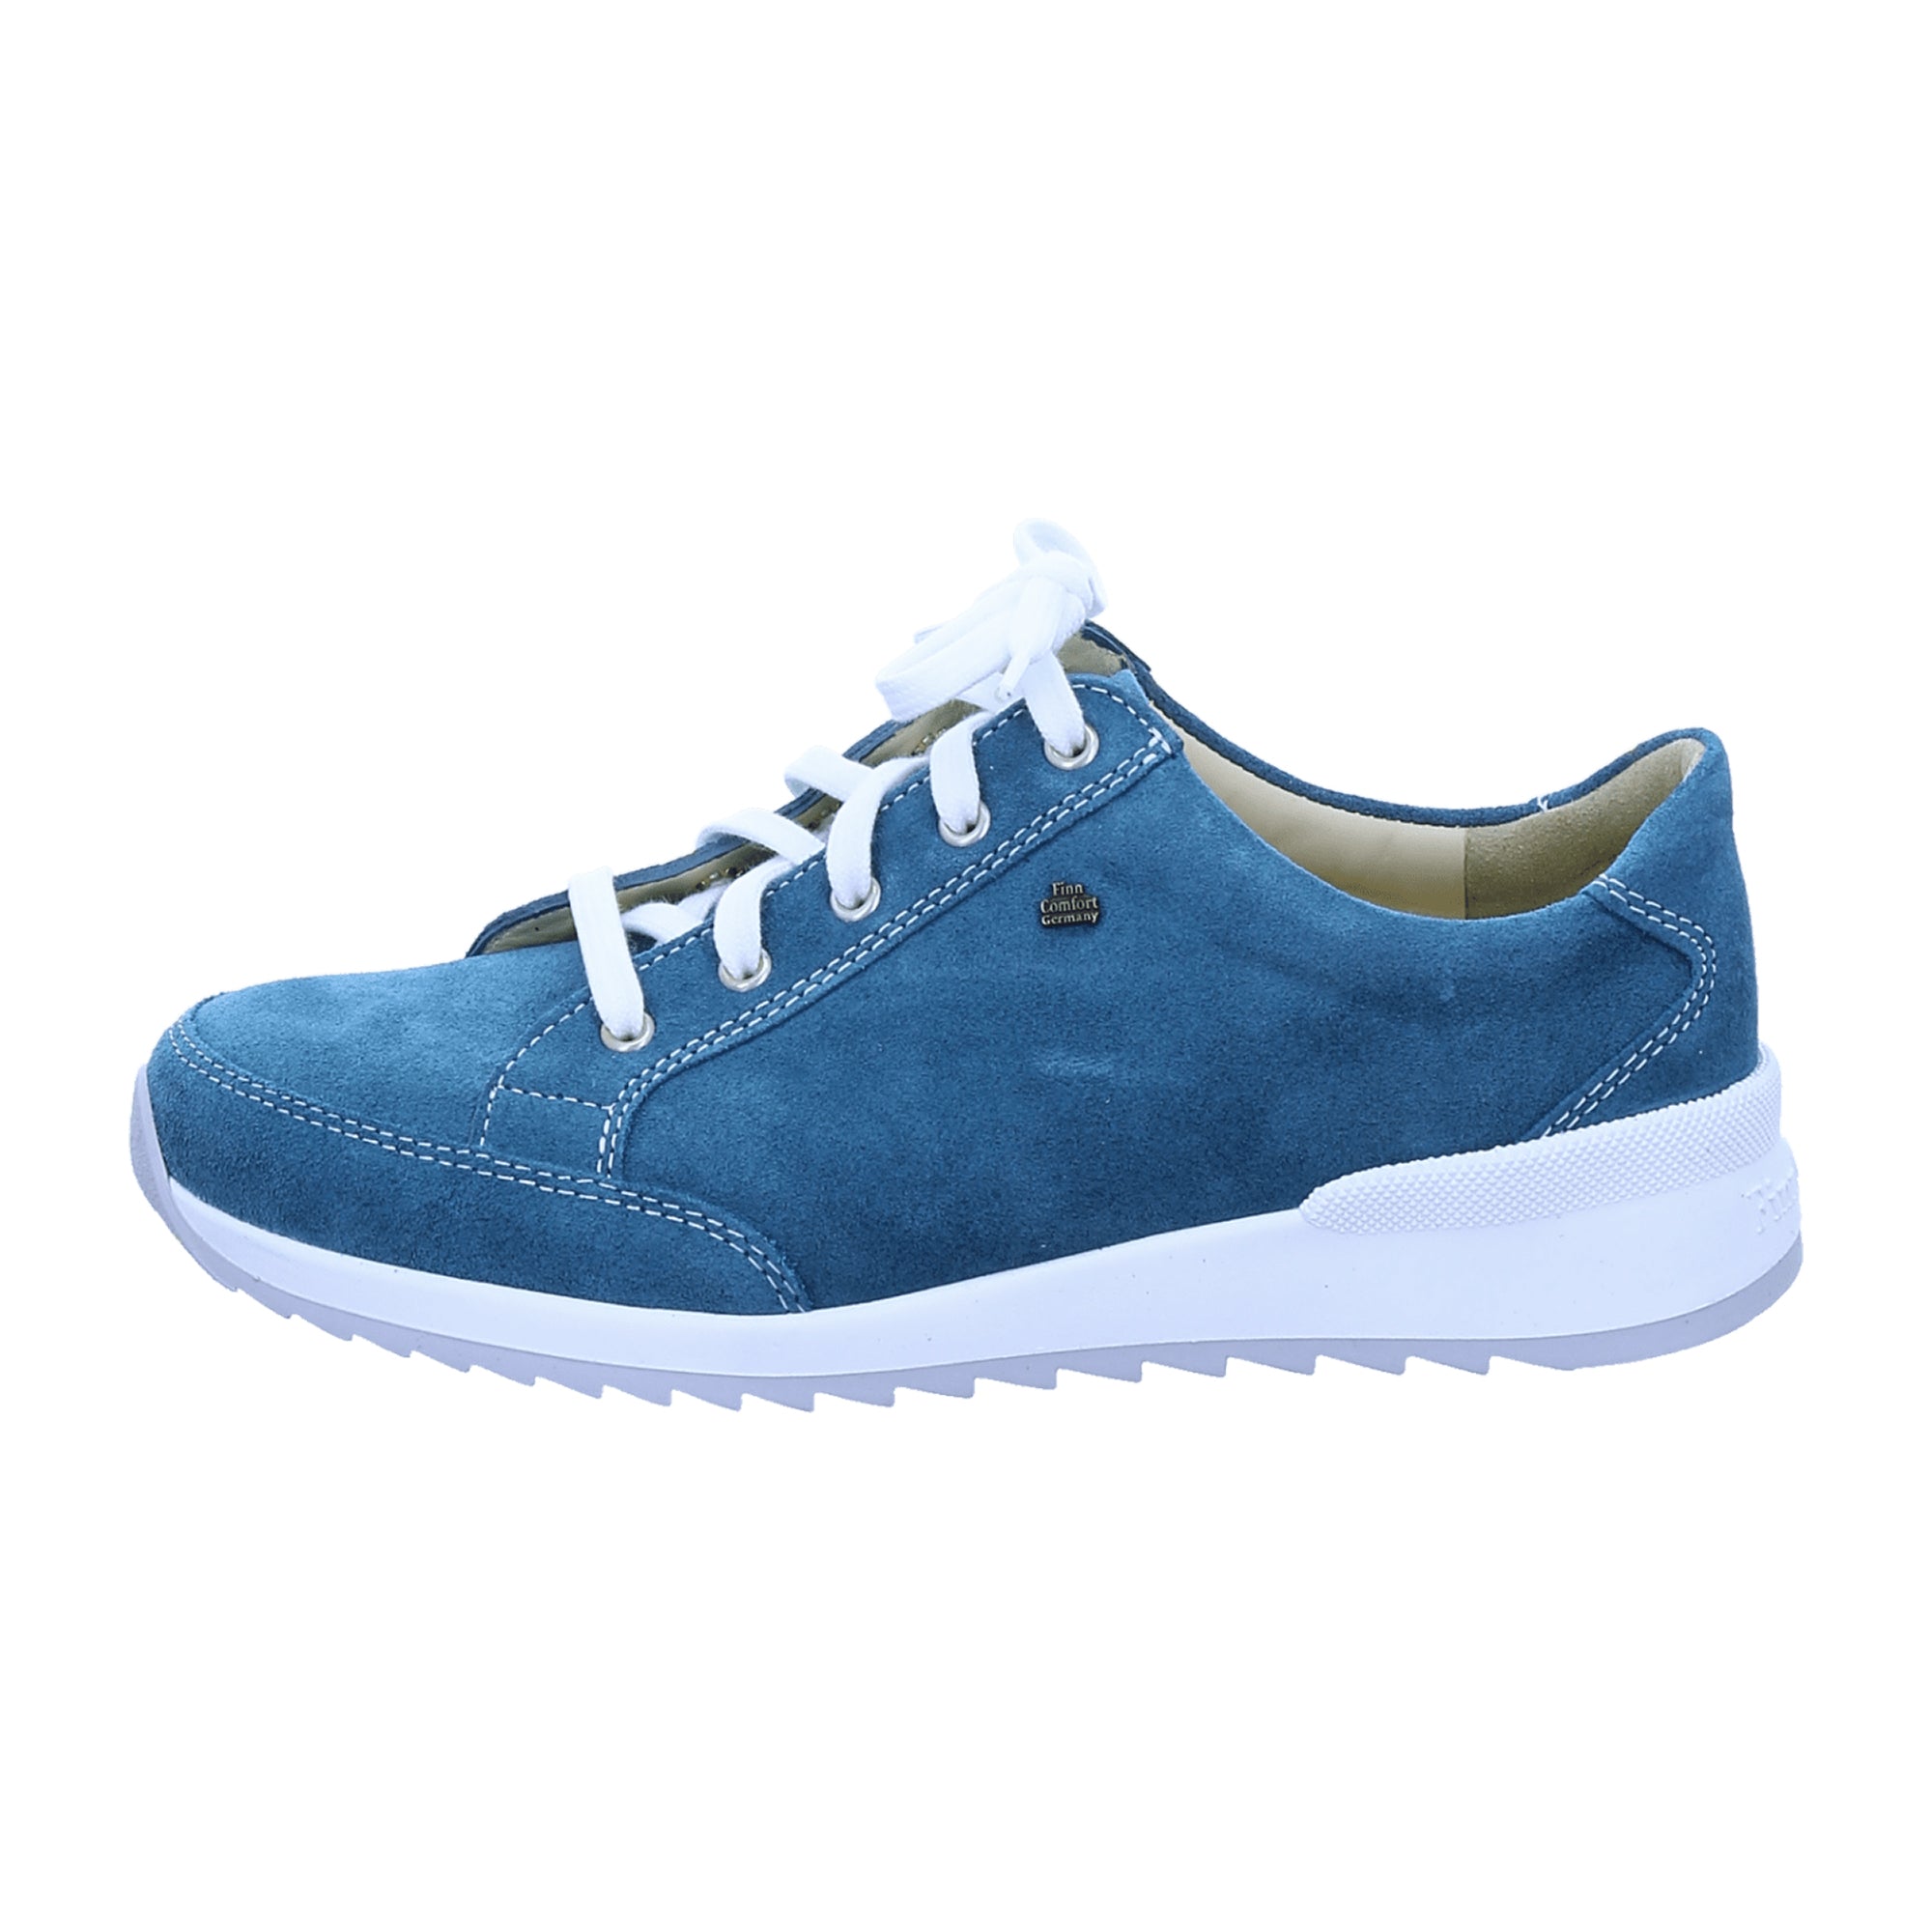 Finn Comfort Pordenone Women's Blue Sneakers - Comfort Lace-Up Shoes with Removable Cork Footbed